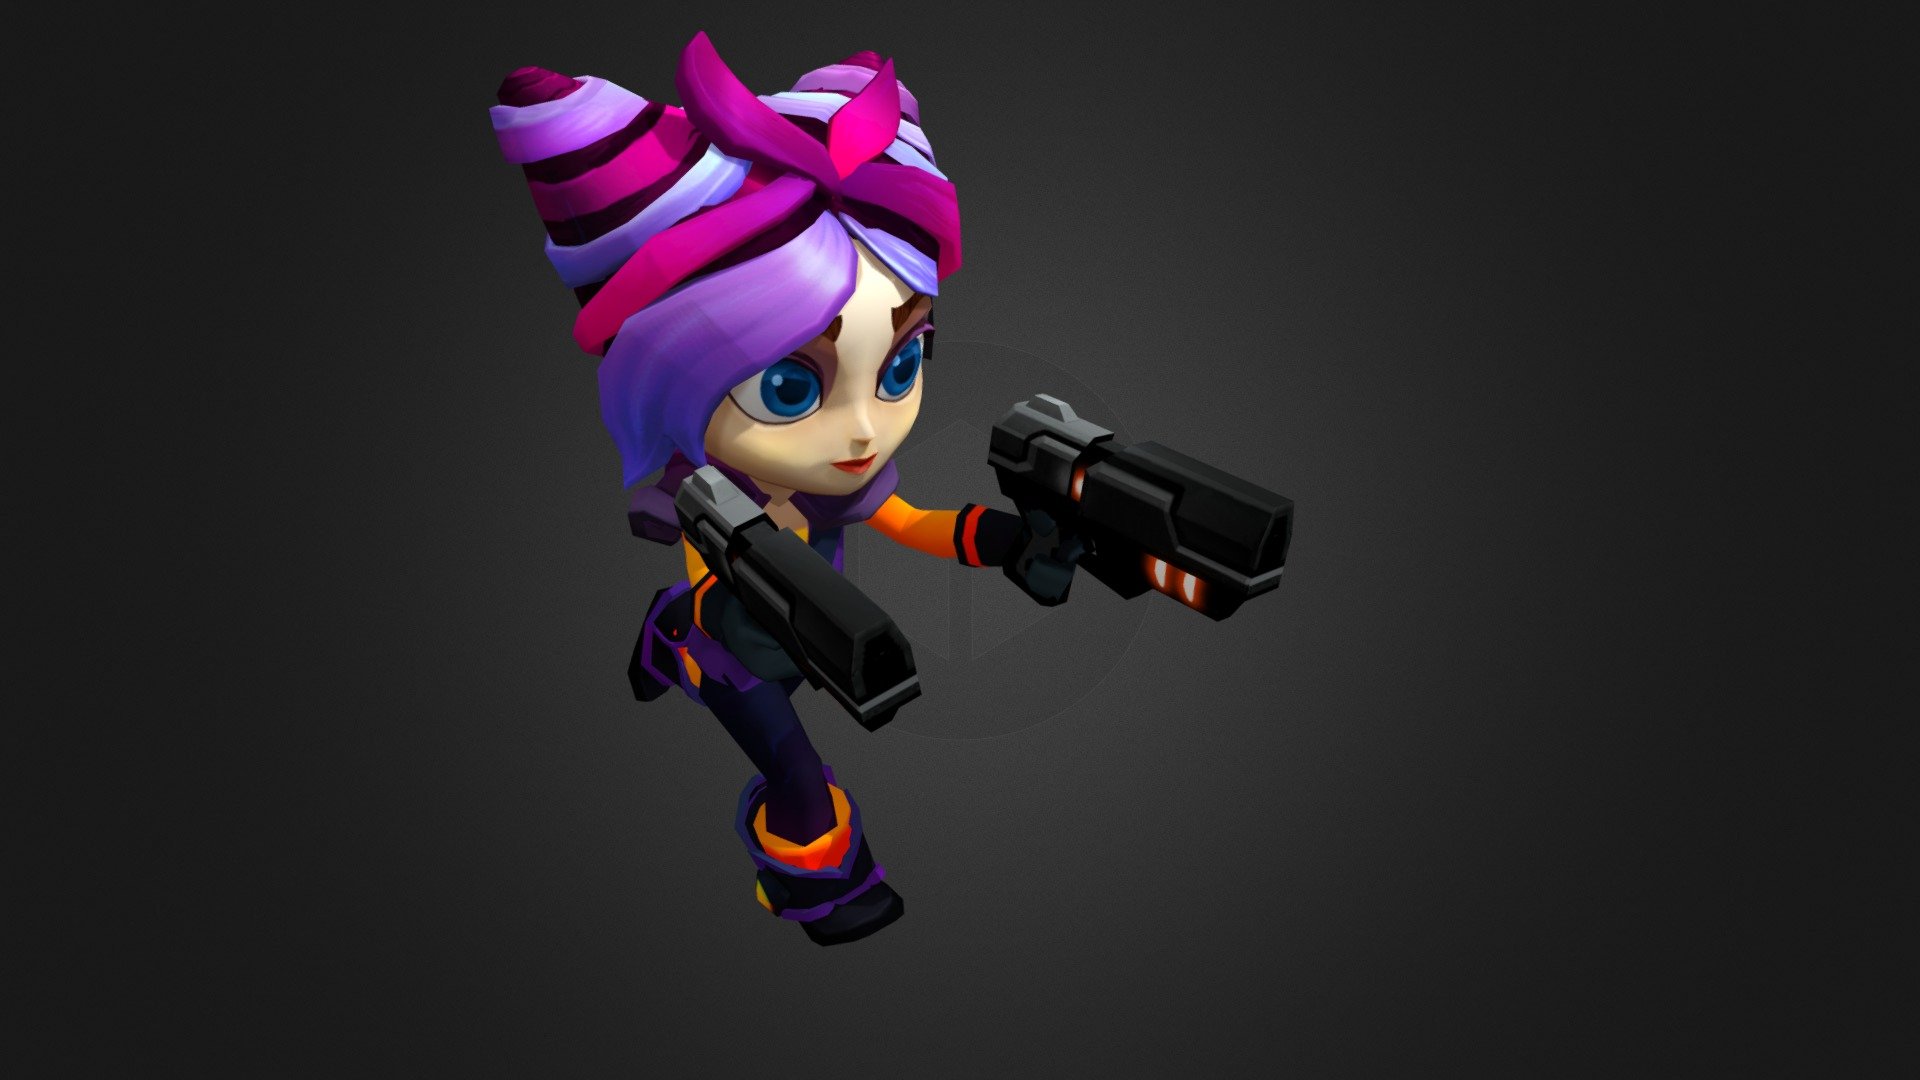 Model




2 textures

3819 poligons

Animations




Ability

Attack

Death

Idle

Idle_attackt

Jump

Revive

Run

Stunned

Win
 - Hero Girl animated character - Buy Royalty Free 3D model by TheGameAssets 3d model